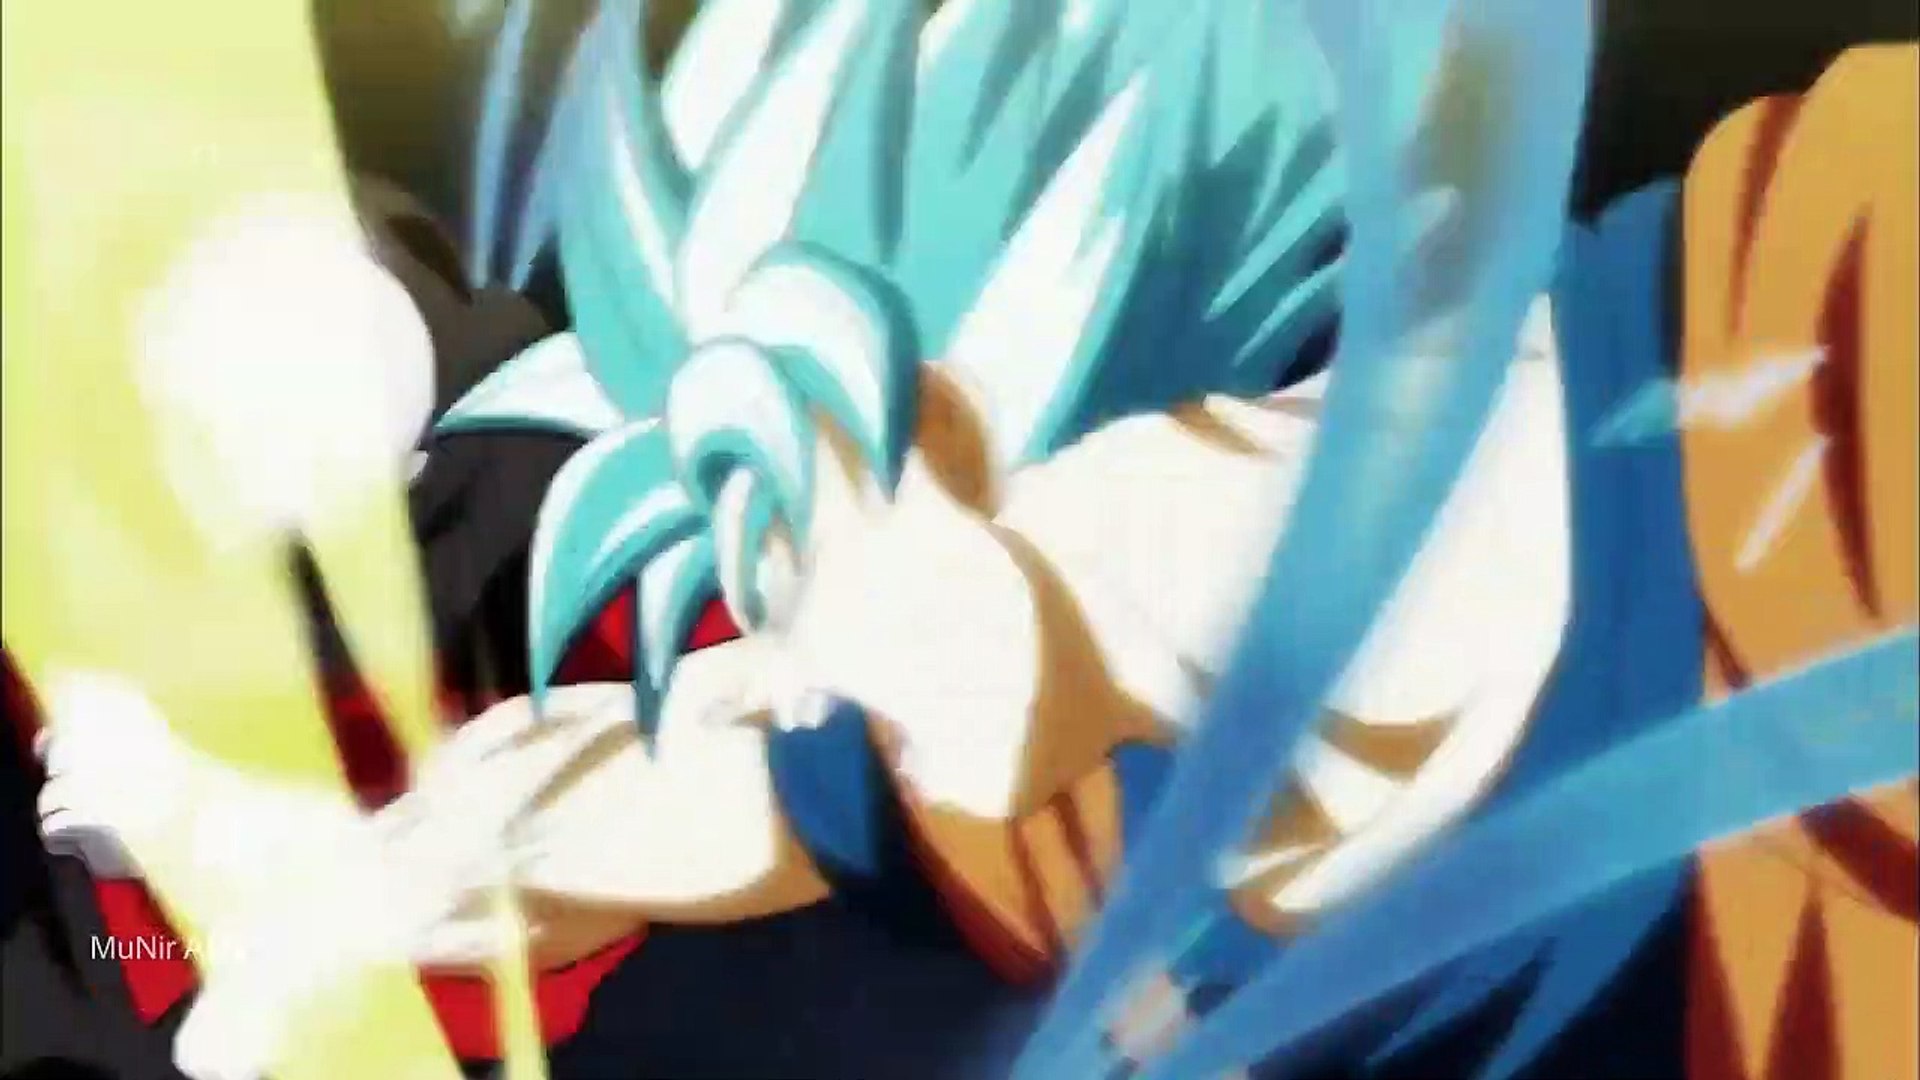 AMV Dragon ball Super Episode 100 What an Awesome Battle it Is!! - video  Dailymotion